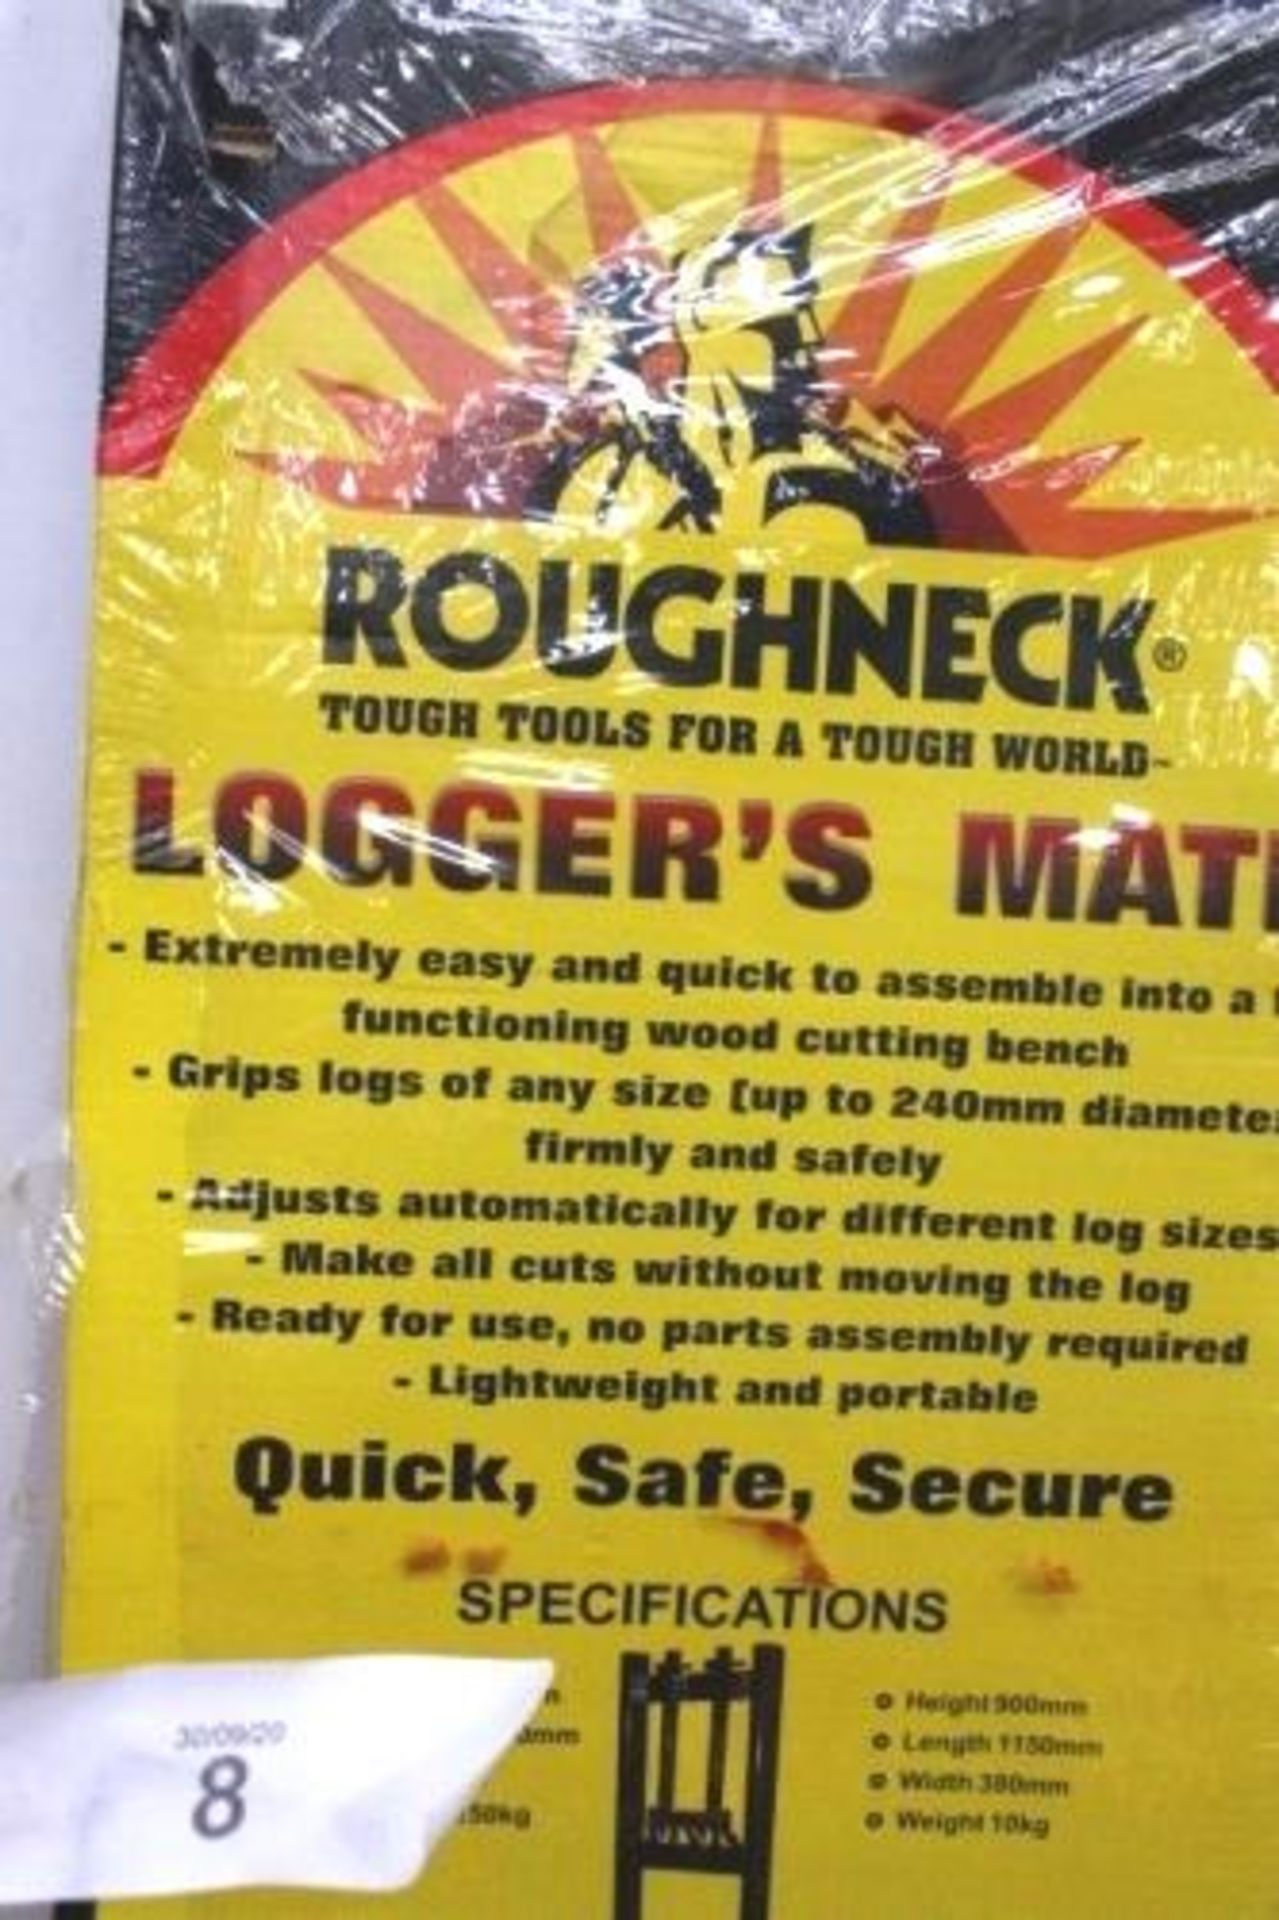 1 x Roughneck logger's mate cutting bench, stock code 65-690 (TC2) - Image 3 of 3